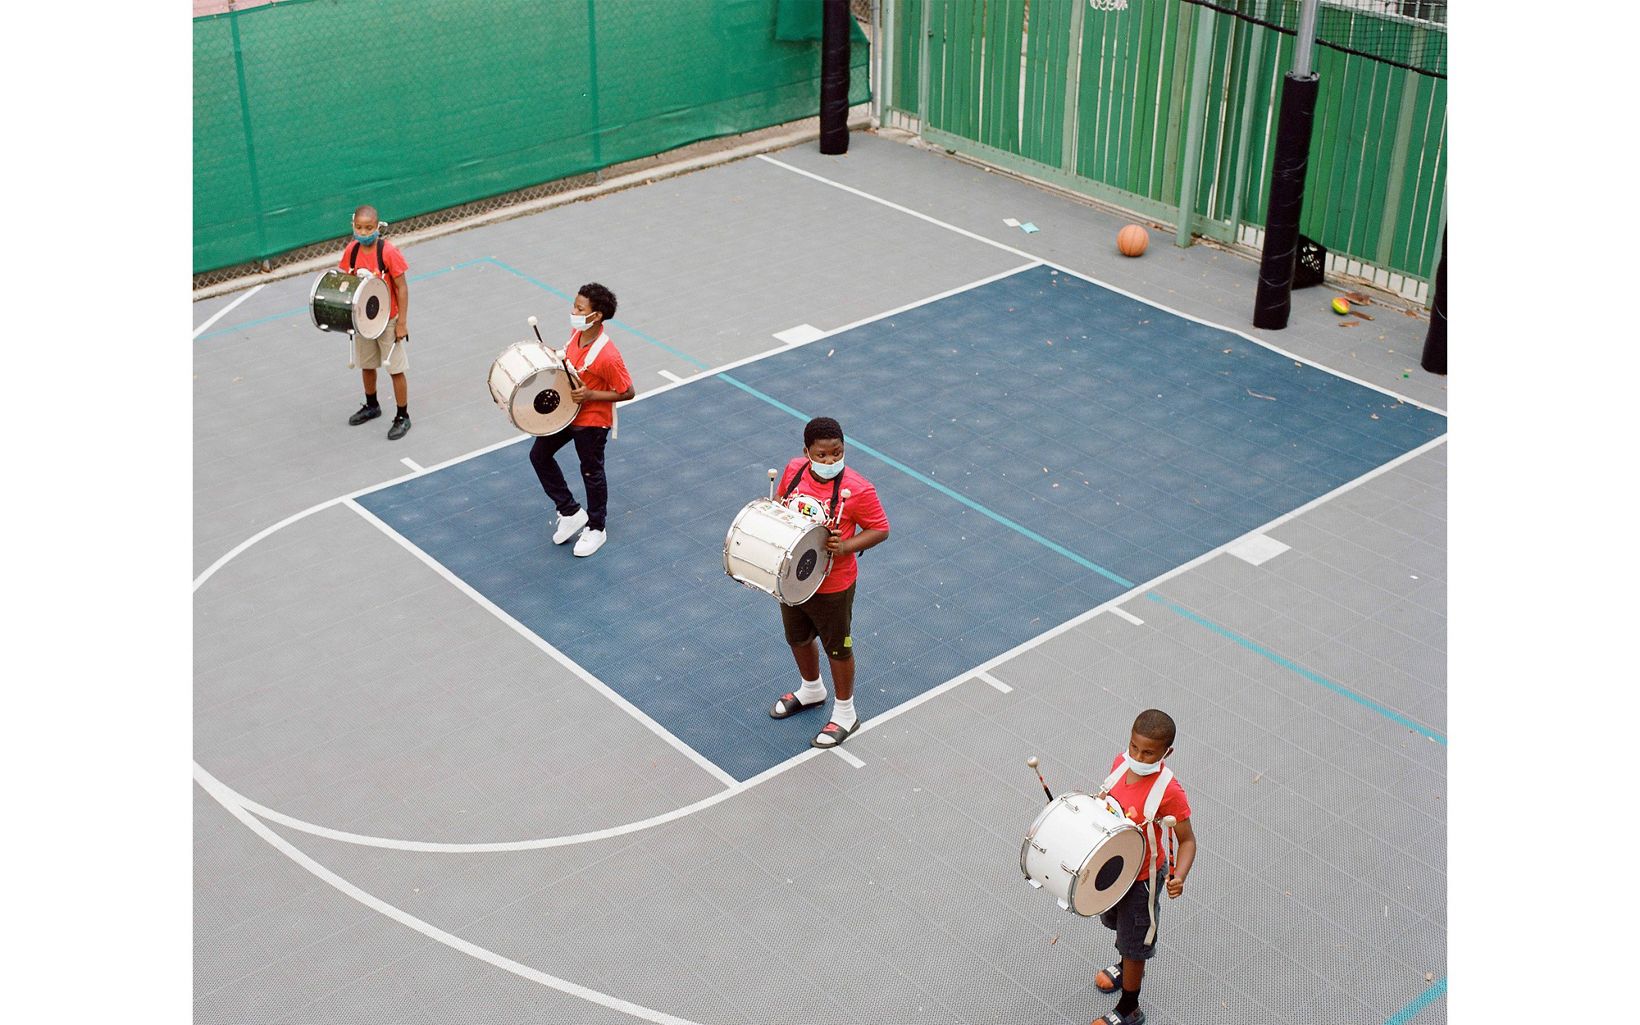 Four young boys in red shirts stand in a line on an outdoor basketball court. They each have a drum strapped to the front of them and are practicing drumming.